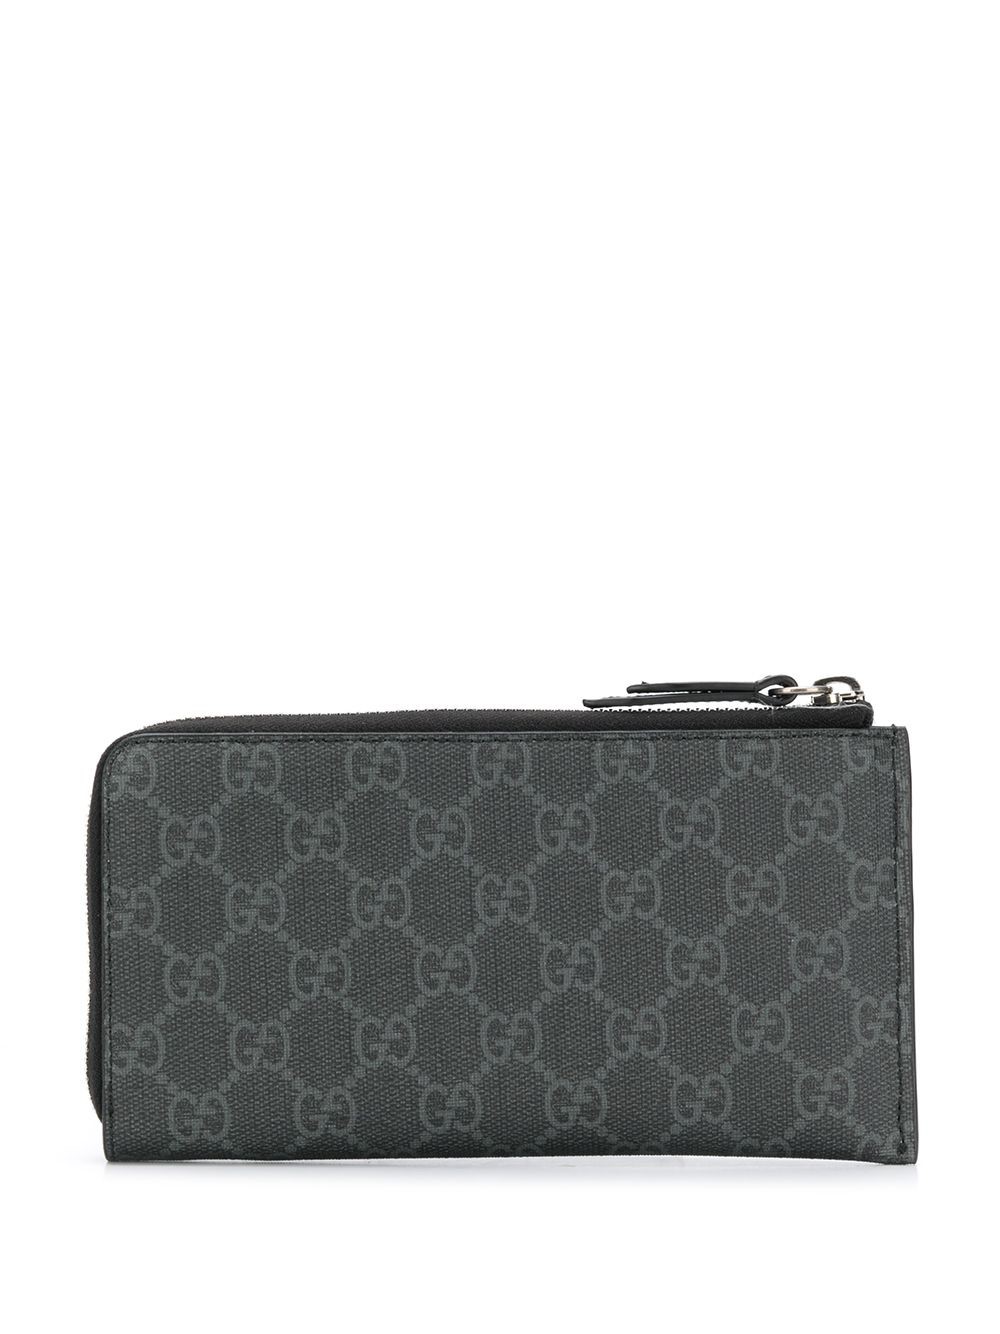 gucci SNAKE WALLET available on www.paulmartinsmith.com - 29082